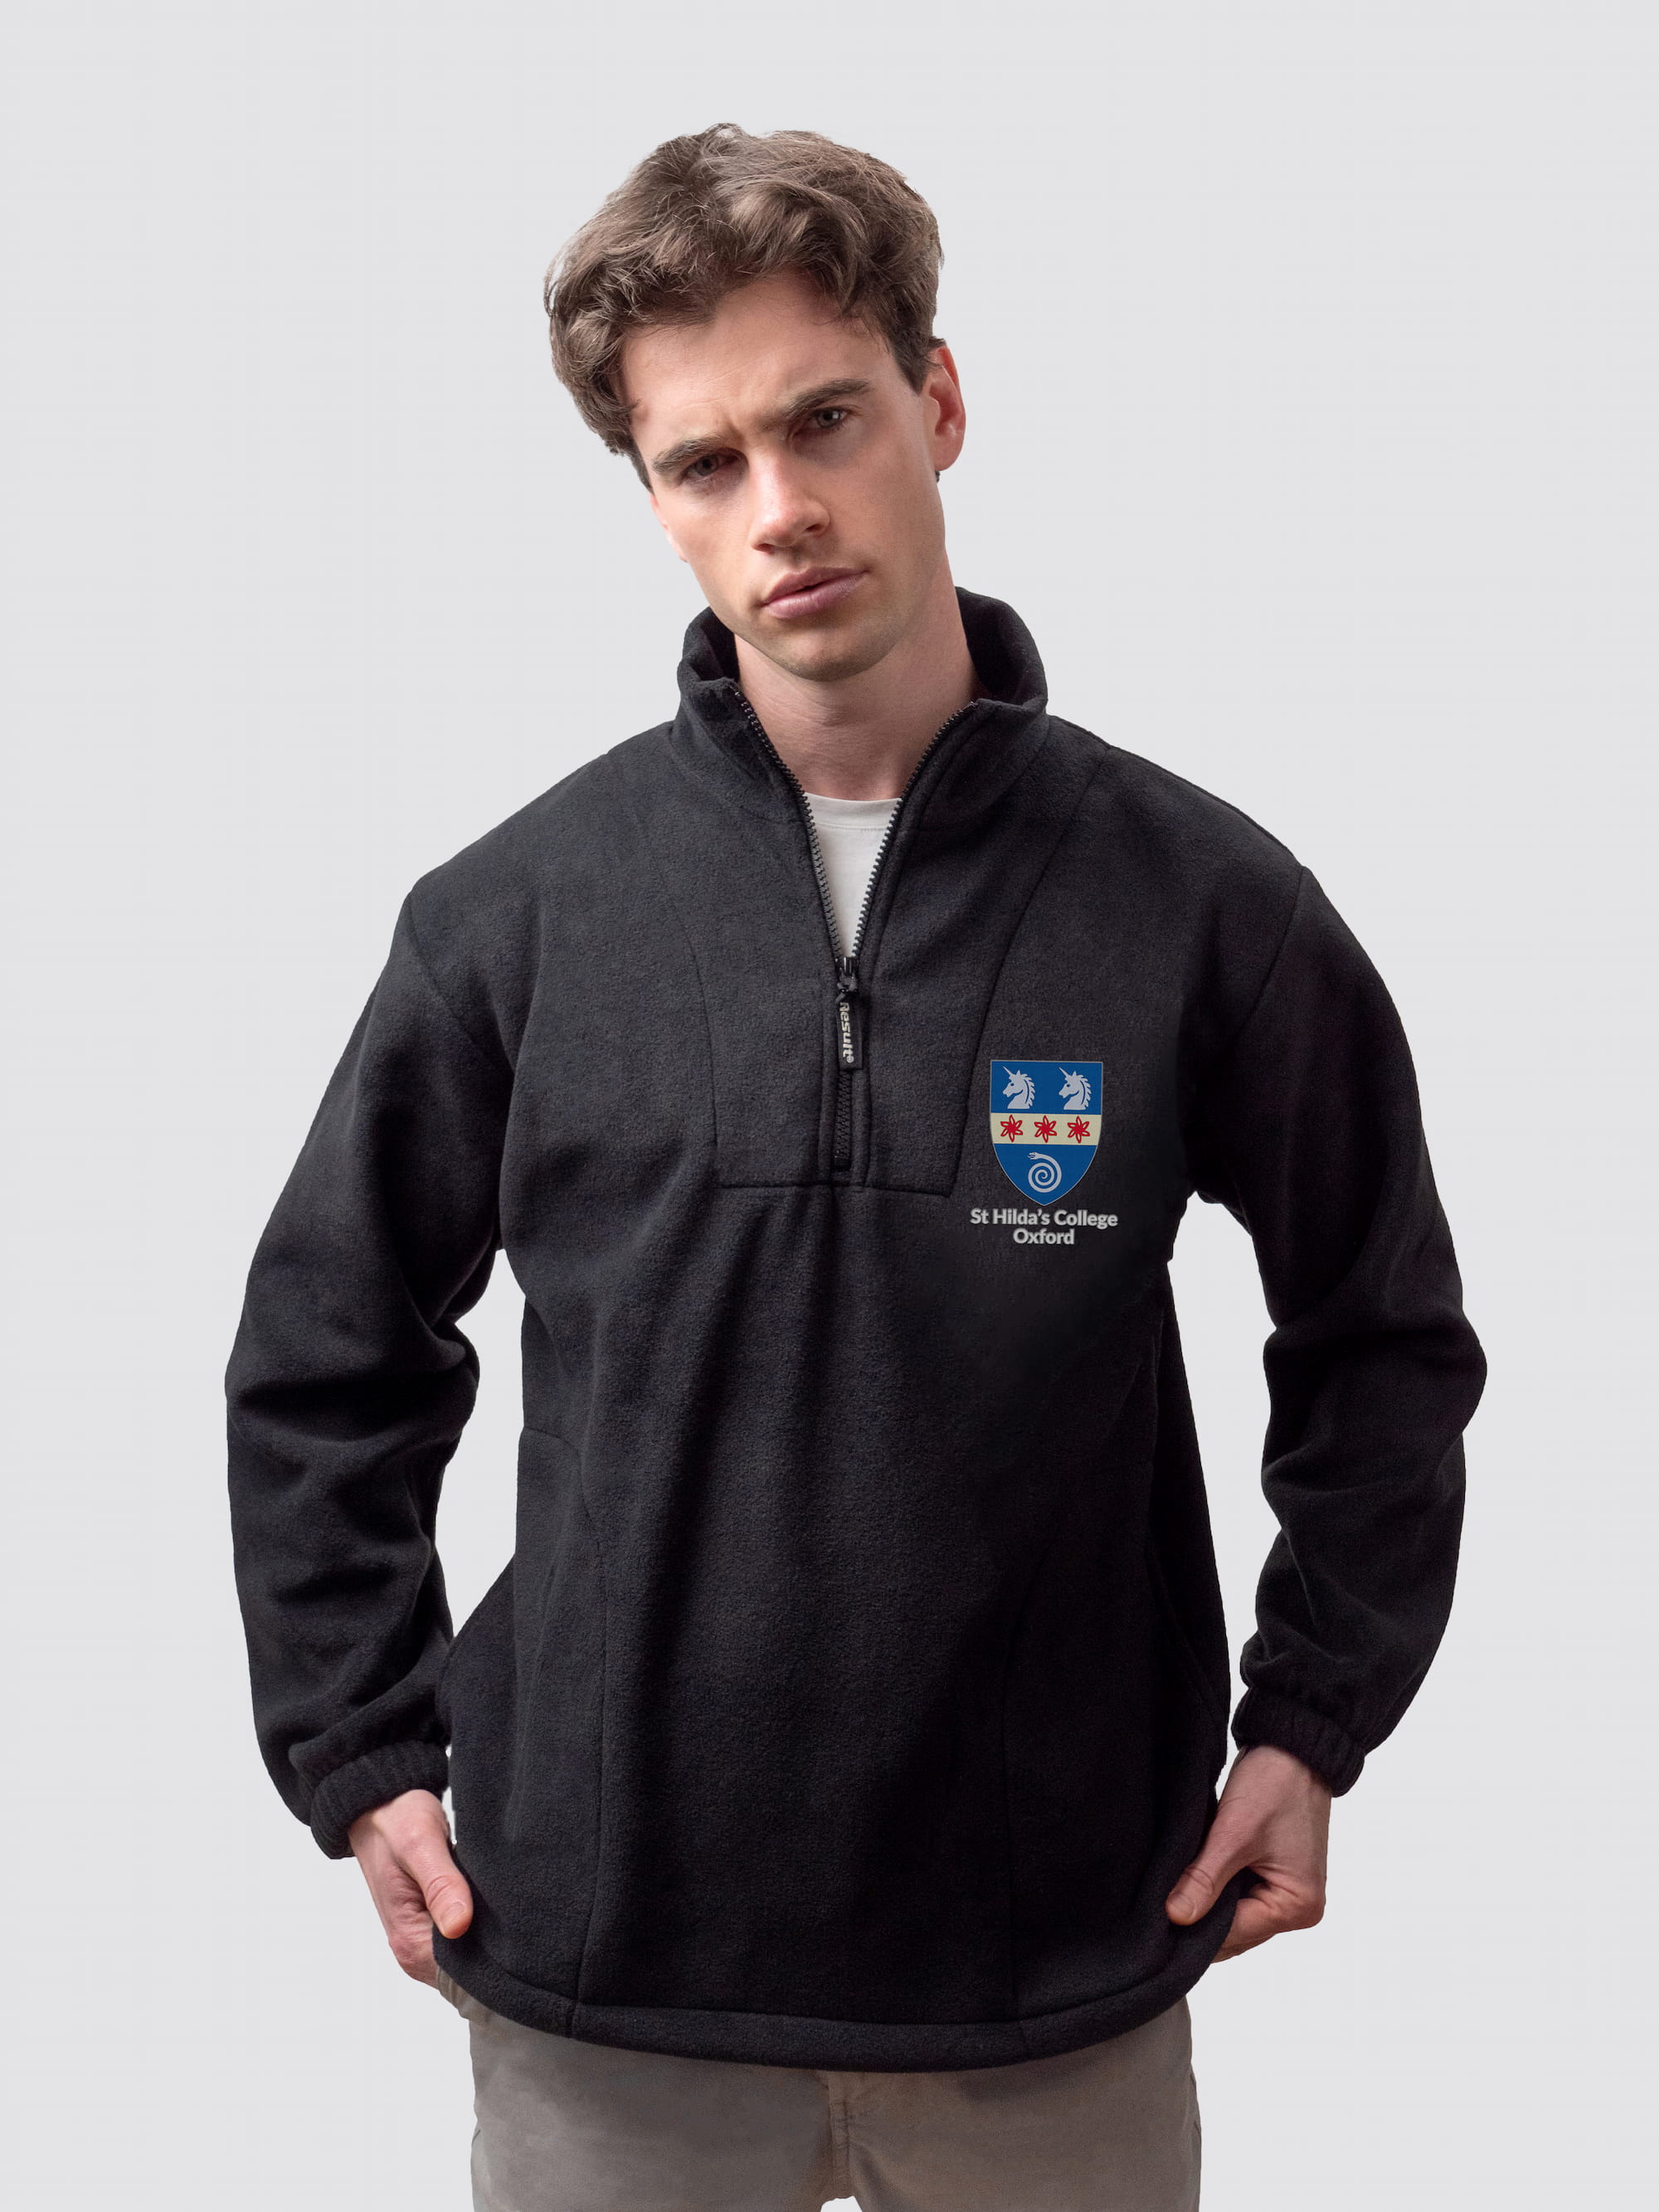 Oxford university fleece, with custom embroidered initials and St Hilda's College crest